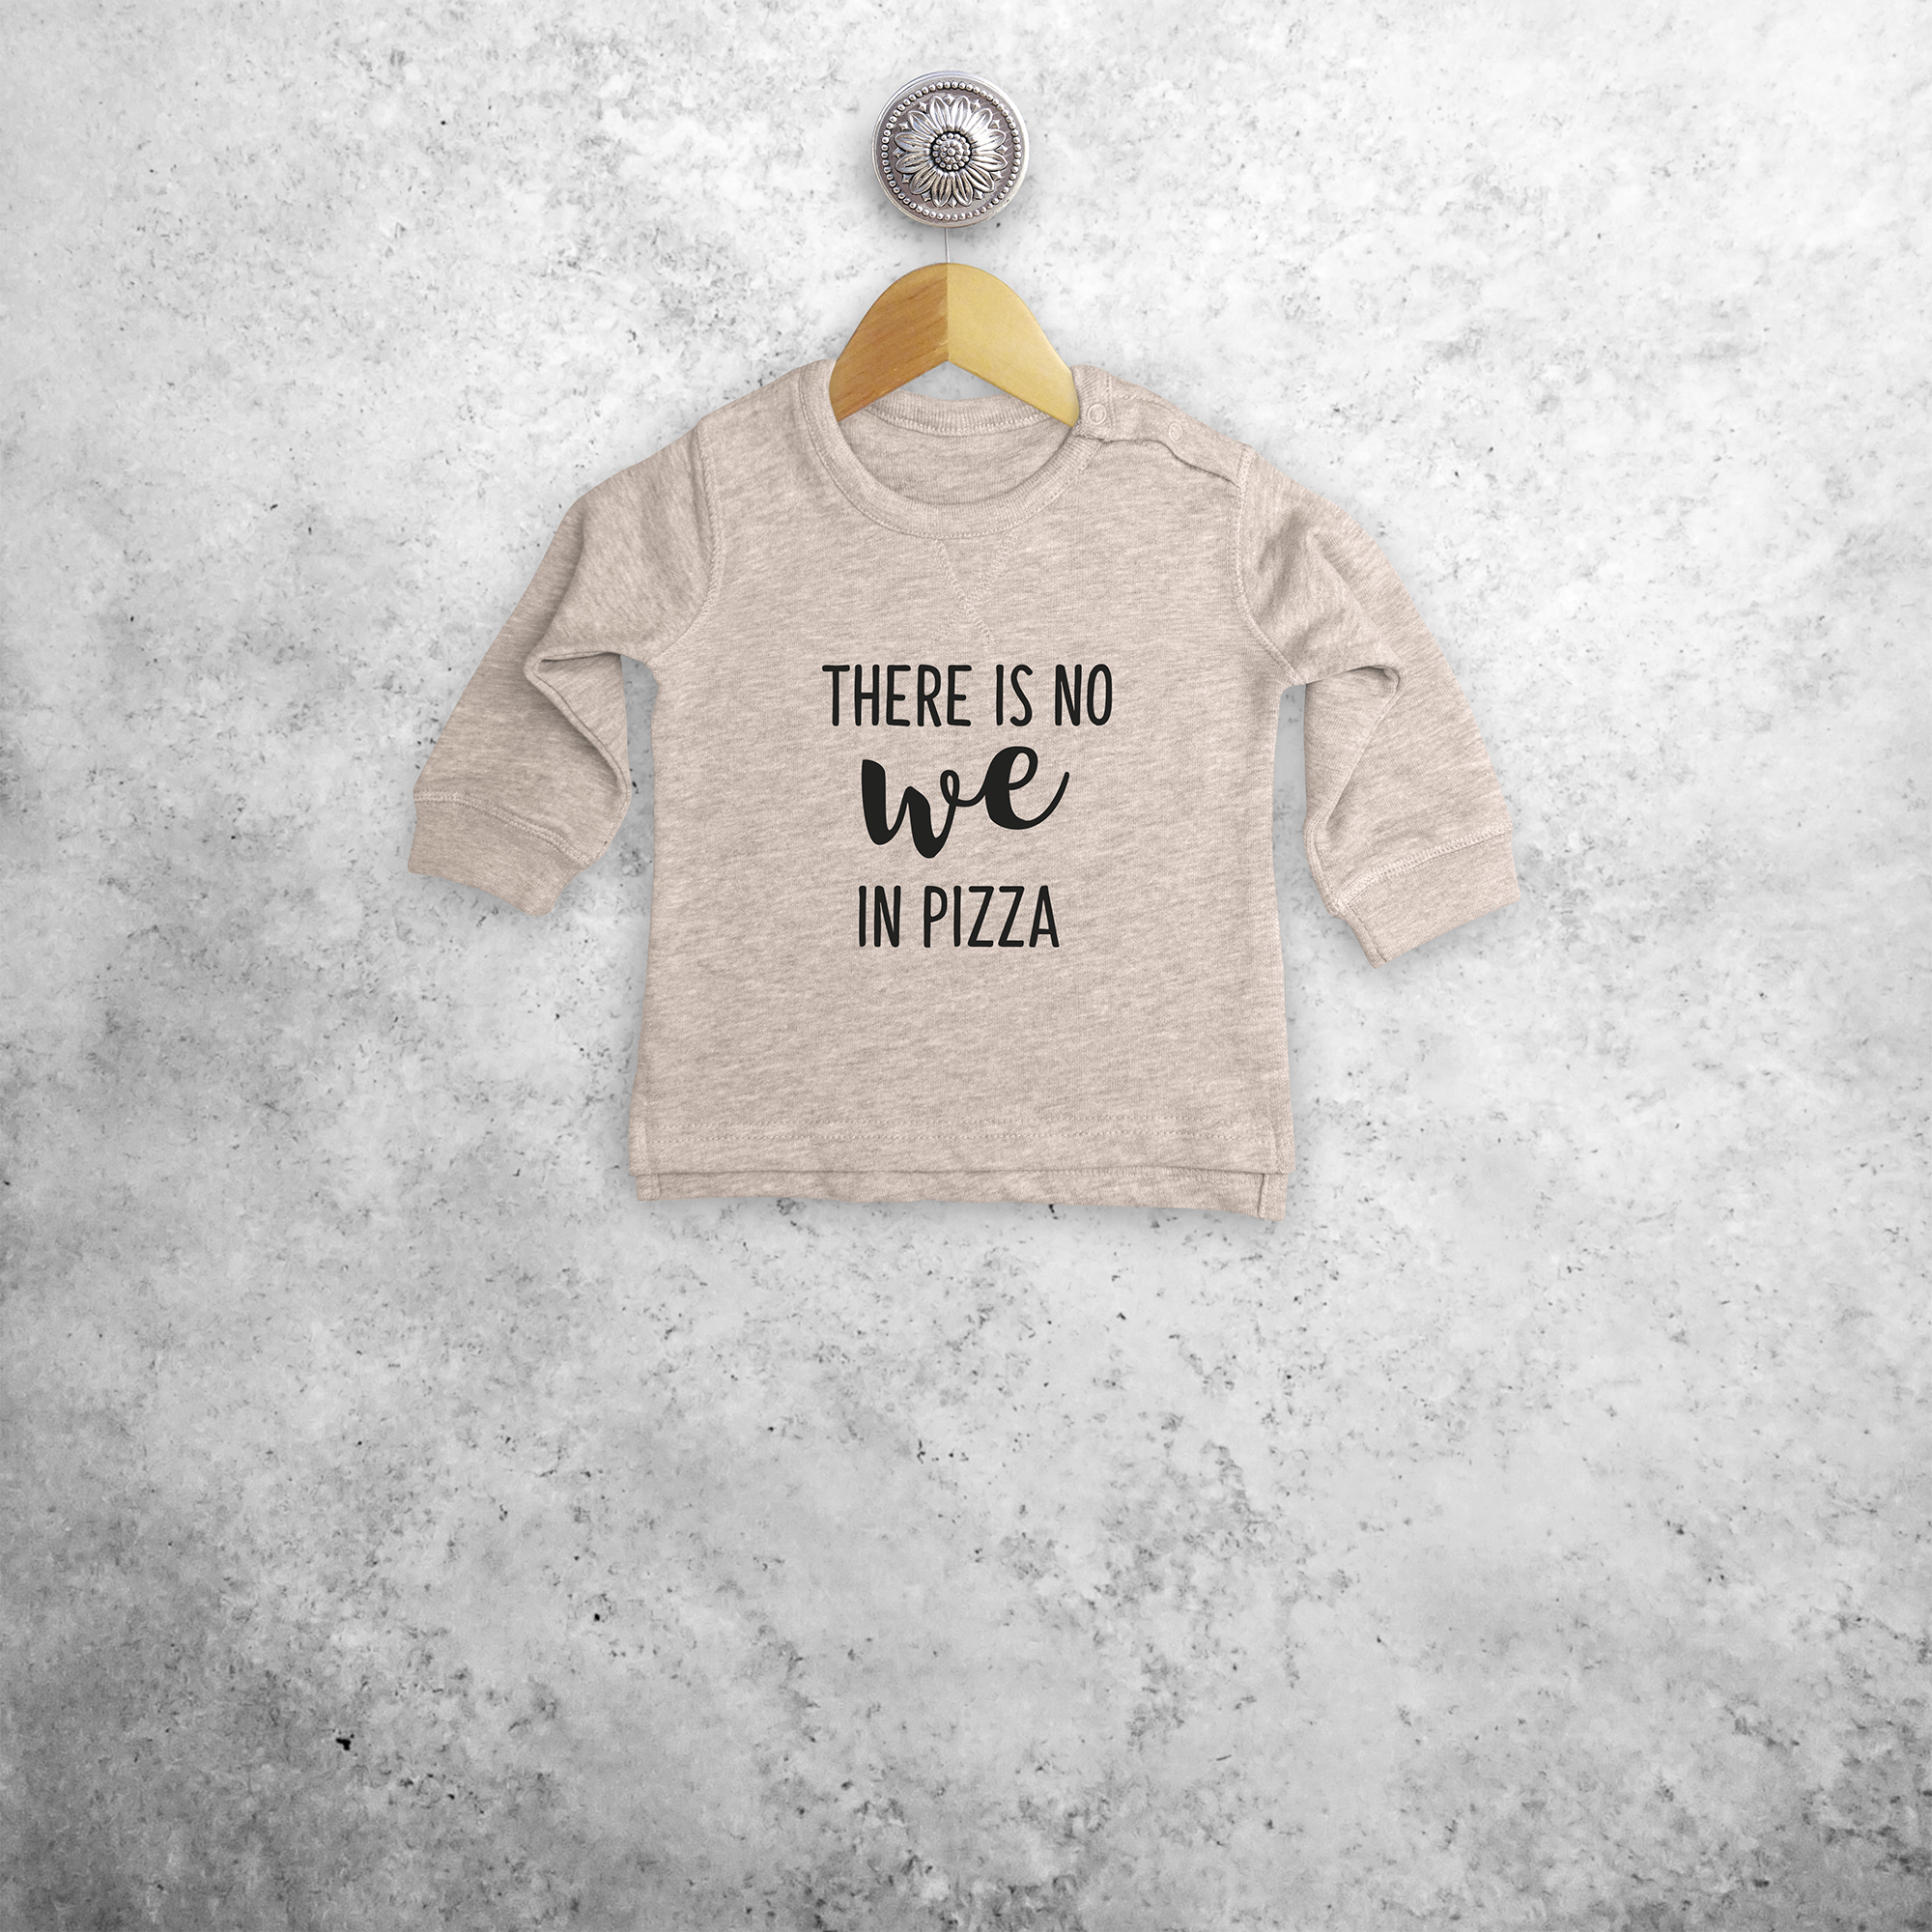 'There is no we in pizza' baby trui